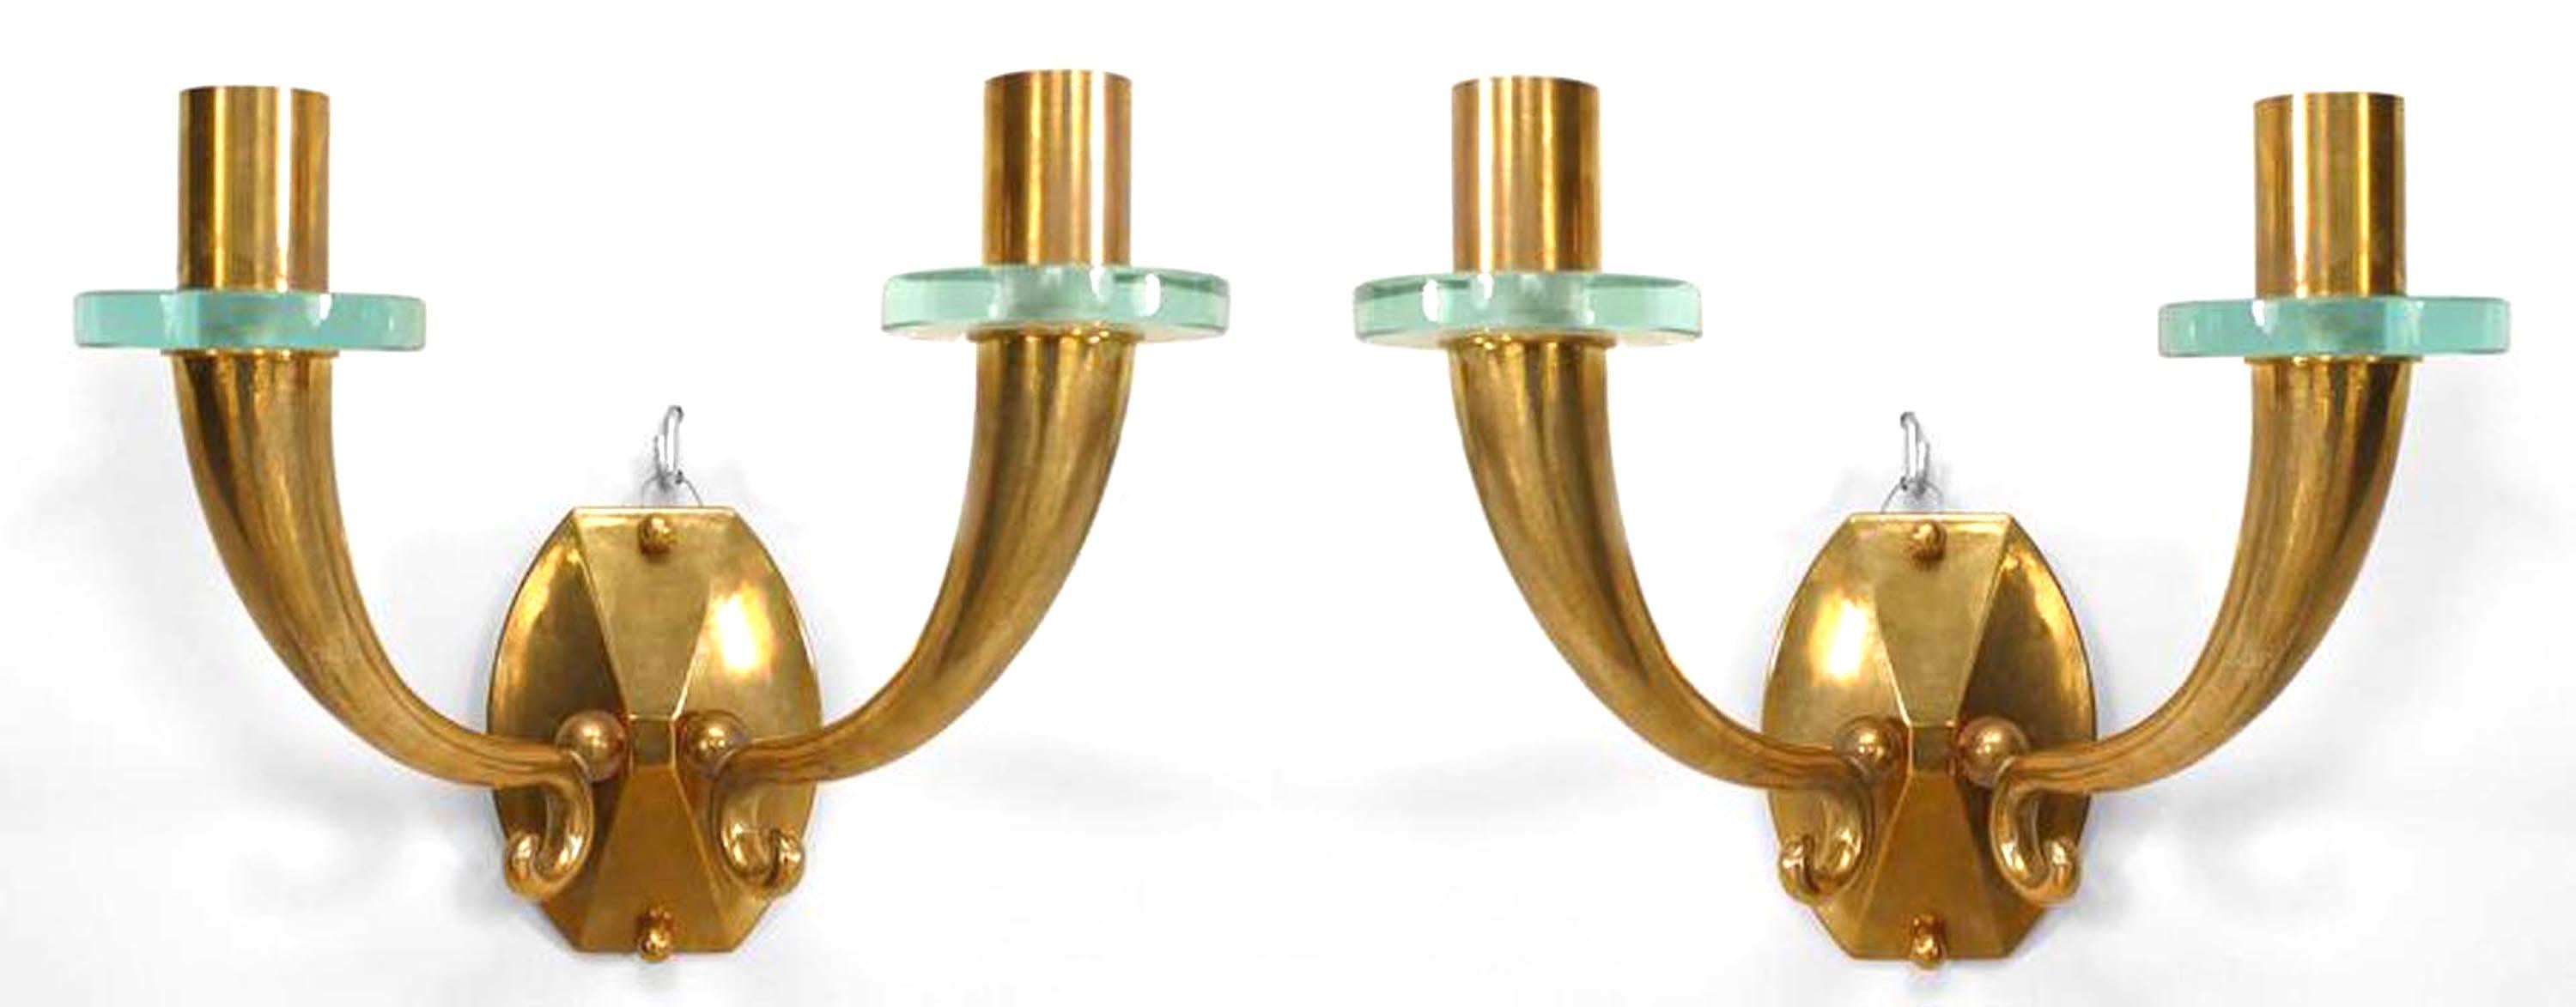 Pair of French Mid-Century (1940's) bronze wall sconces with 2 scroll and cornucopia design arms with a round glass bobeche and supported by a shaped backplate. (PRICED AS Pair)
